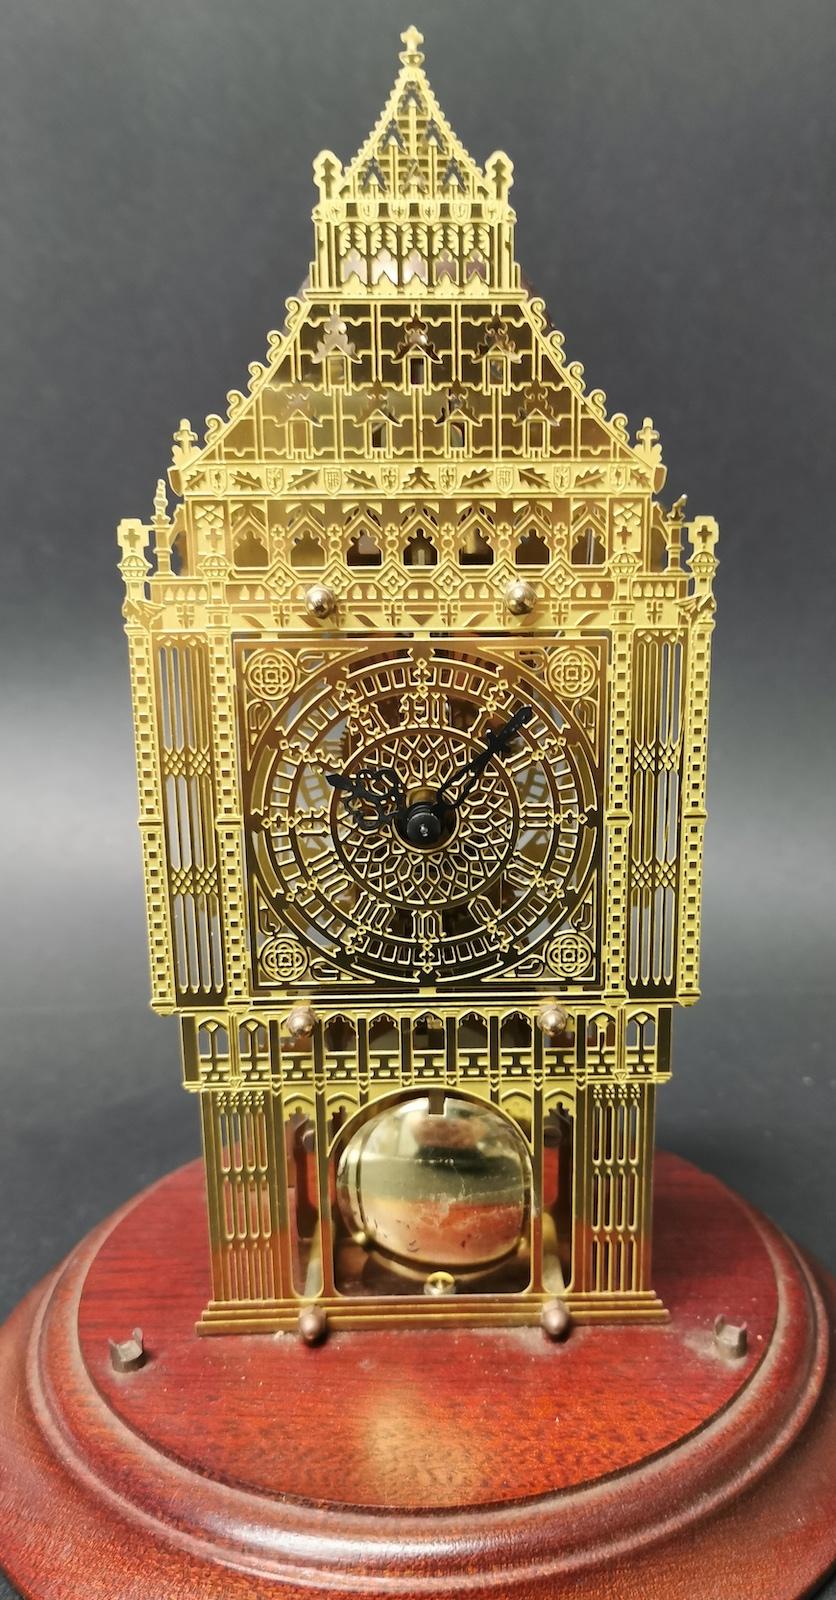 Big ben brass skeleton clock in a glass dome,
chimes on hours,
the glass dome measures: 20 x 30cm high.